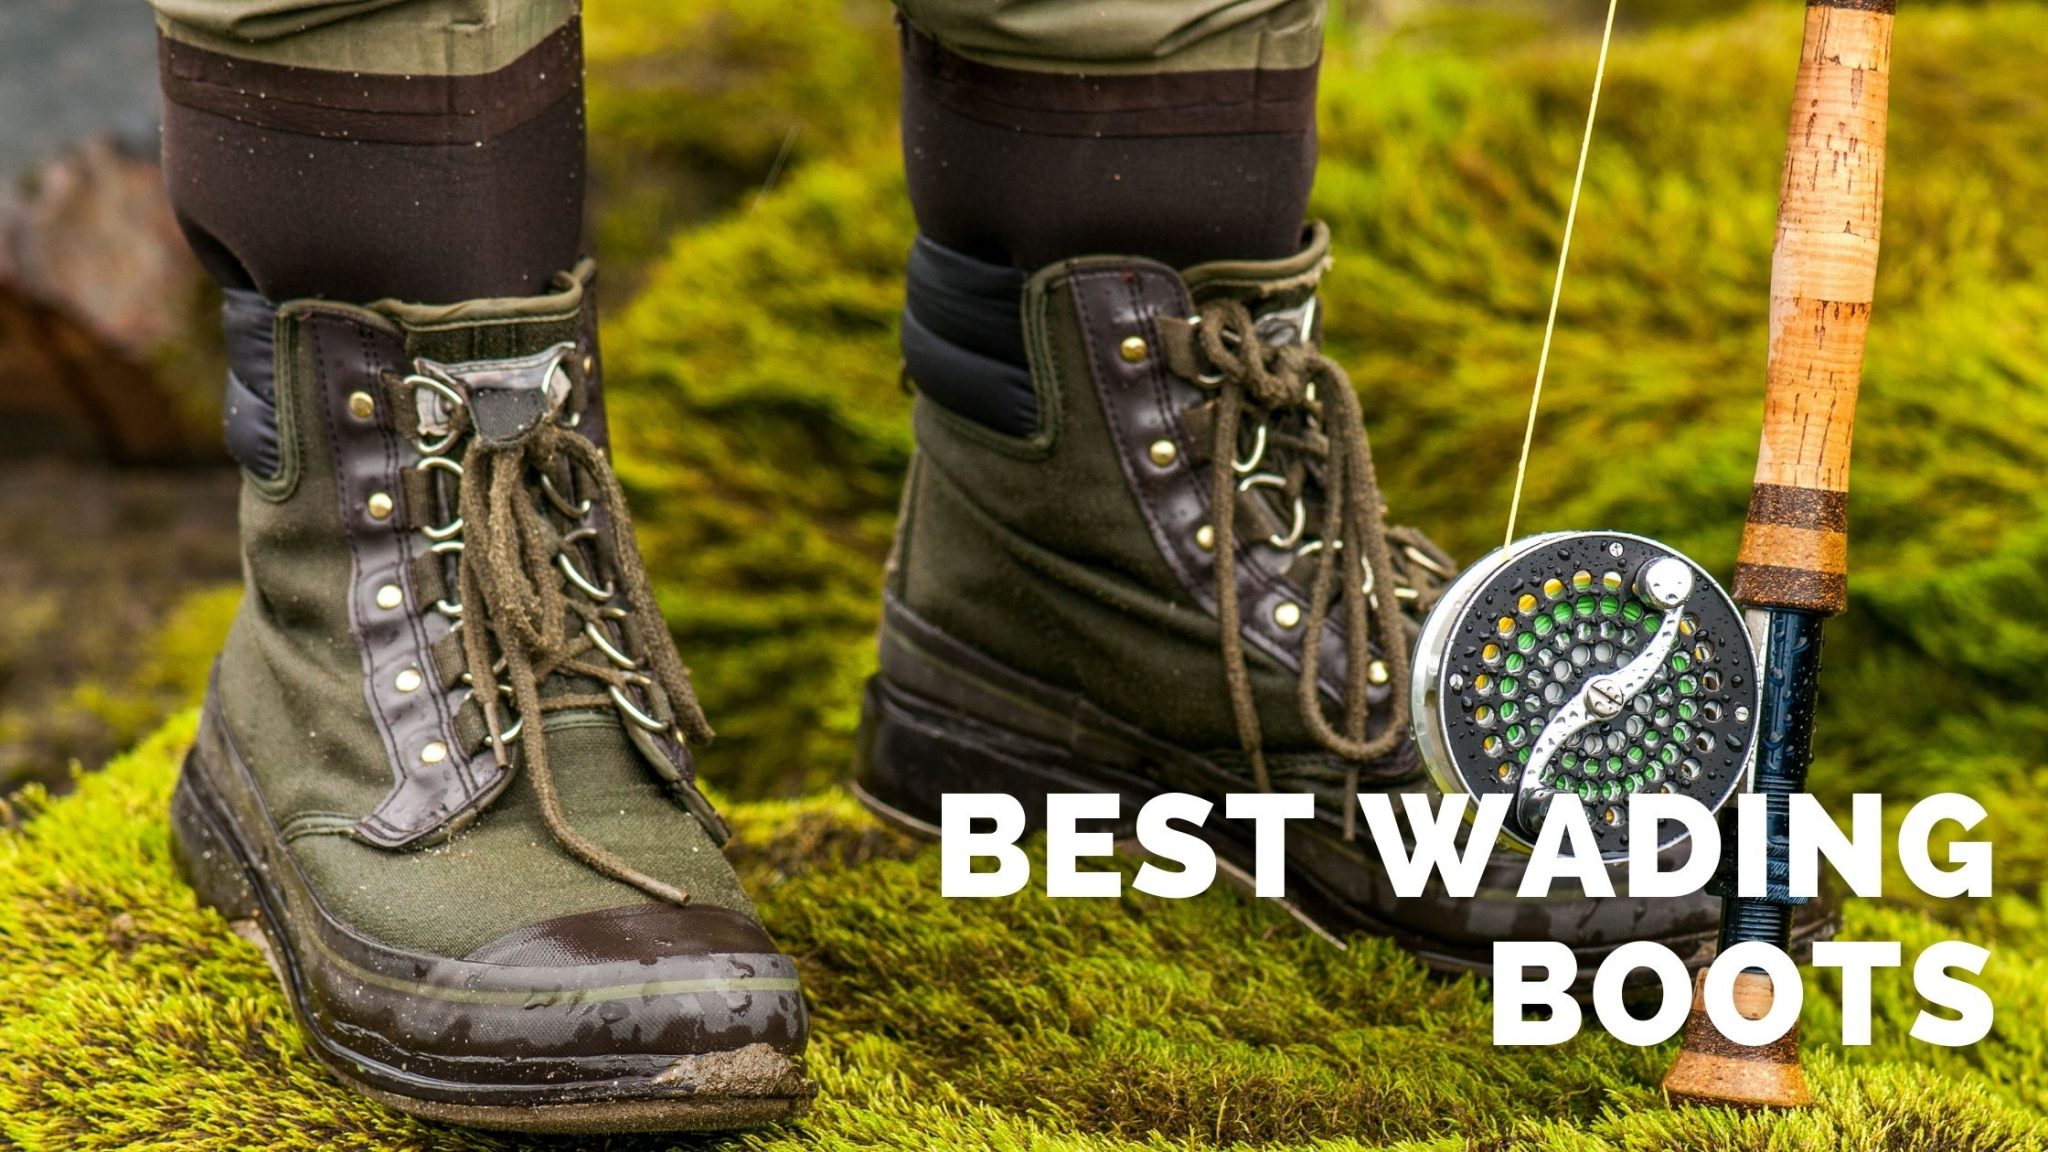 Top 15 Best Wading Boots for fly fishing (Buyer's Guide)